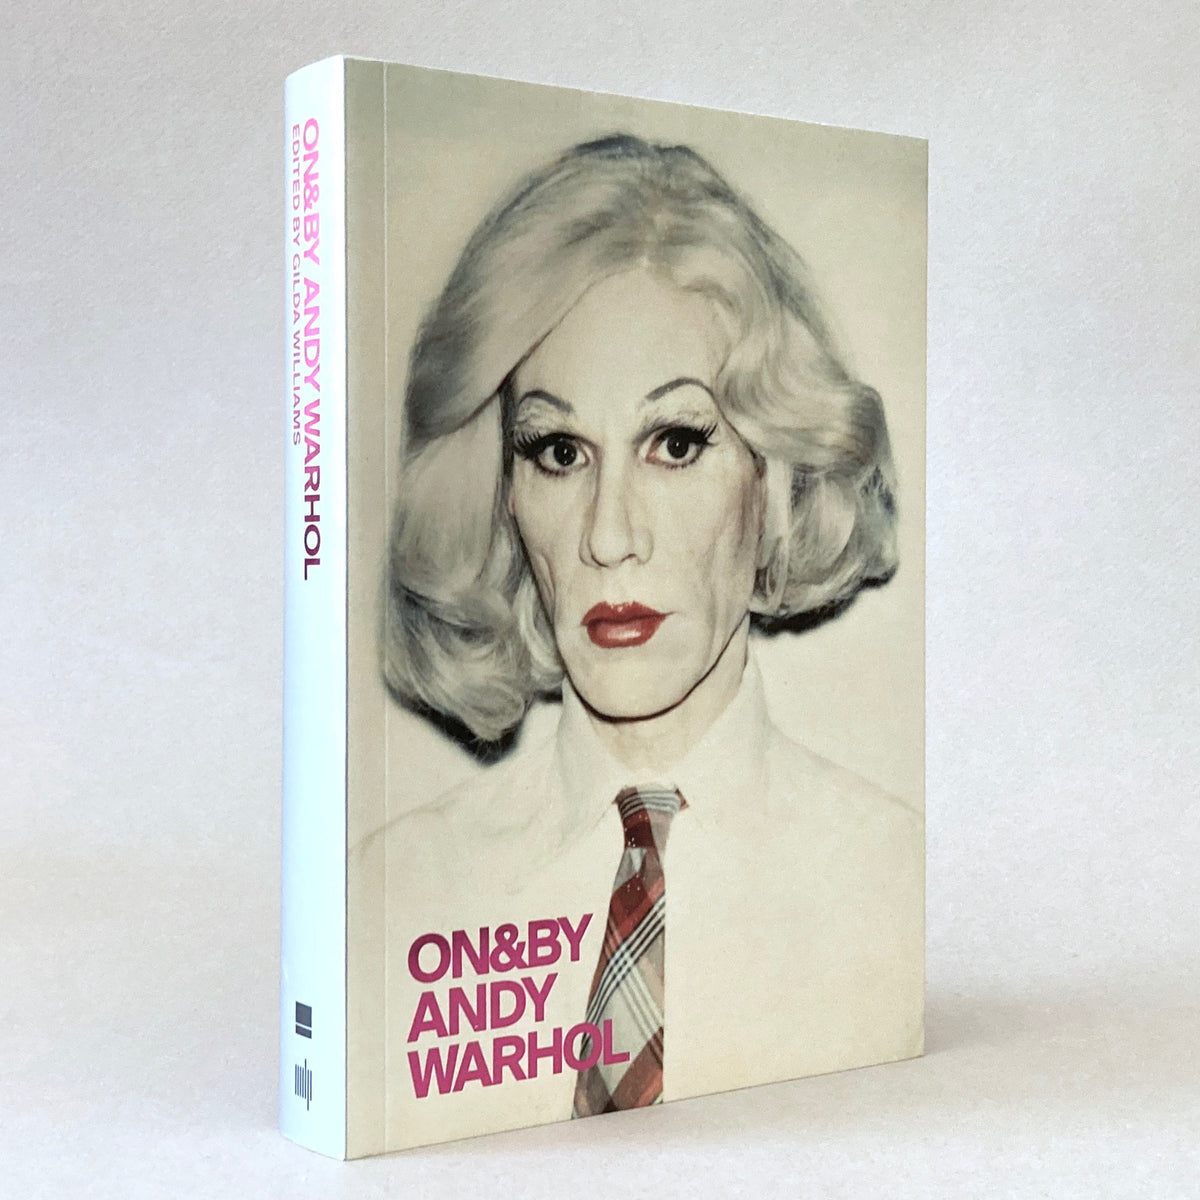 ON&BY Andy Warhol